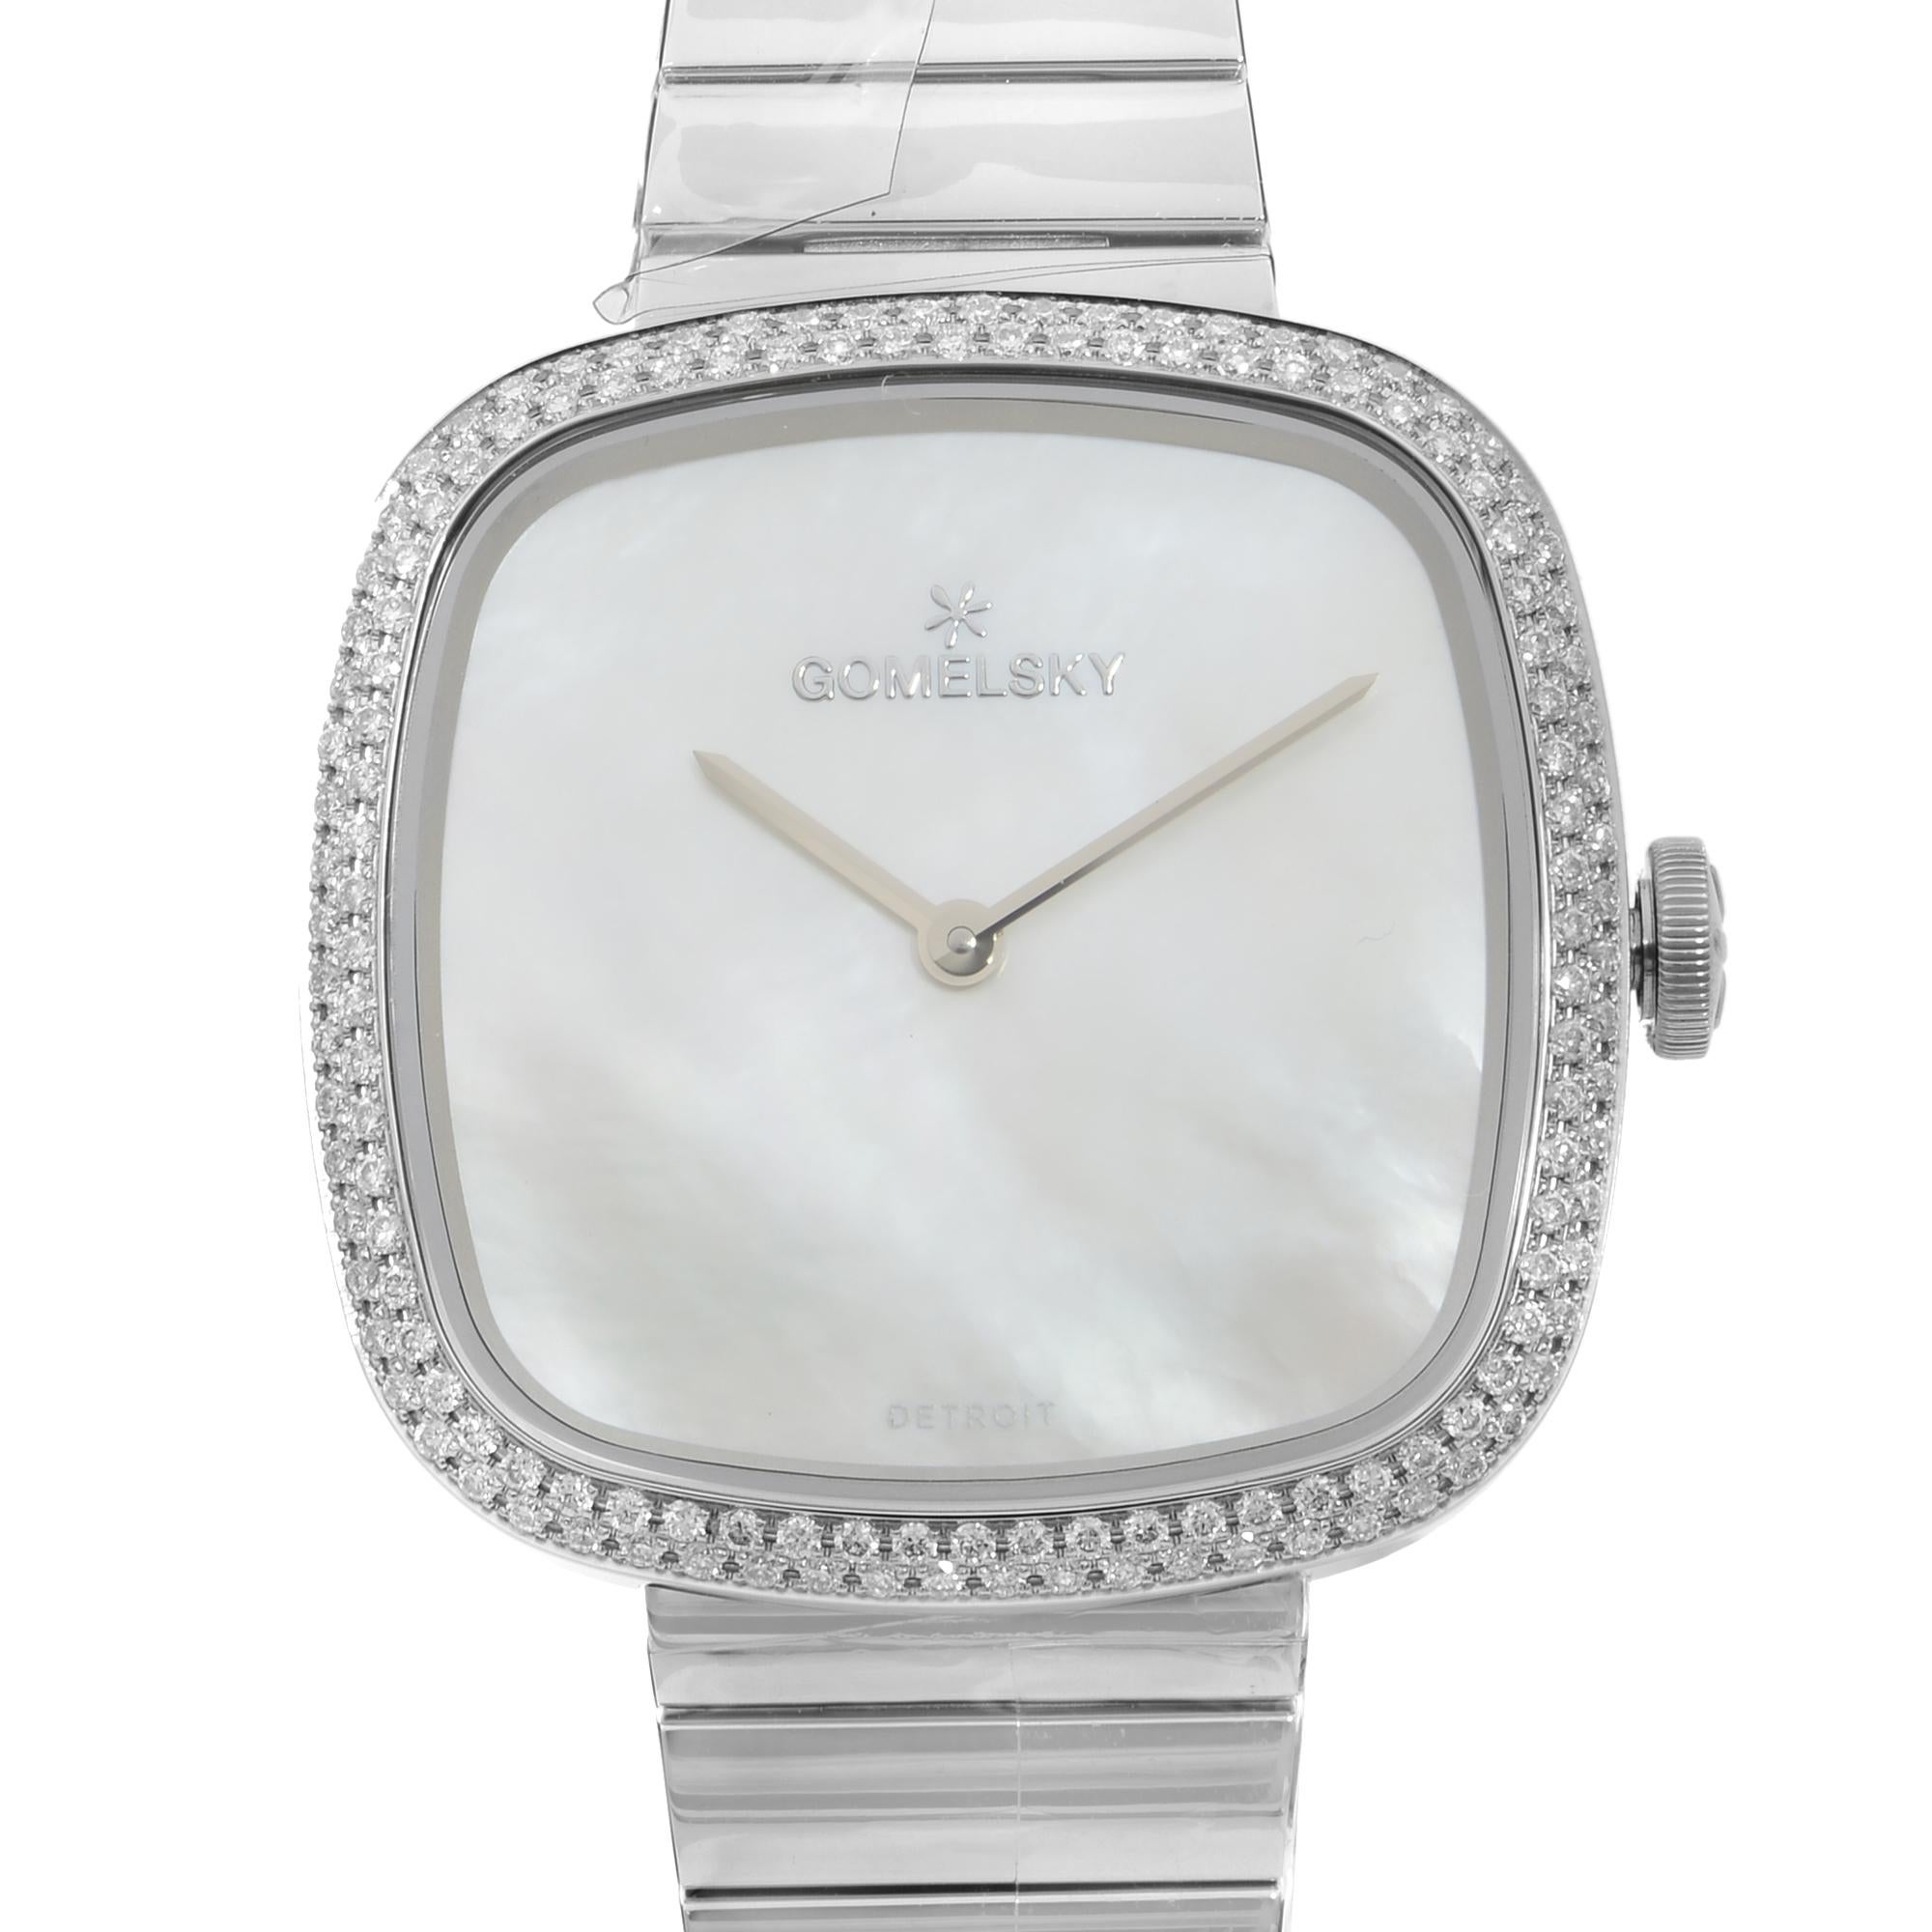 This brand new Gomelsky Eppie Sneed G0120095028 is a beautiful Ladie's timepiece that is powered by quartz (battery) movement which is cased in a stainless steel case. It has a  rectangle shape face,  dial and has hand unspecified style markers. It